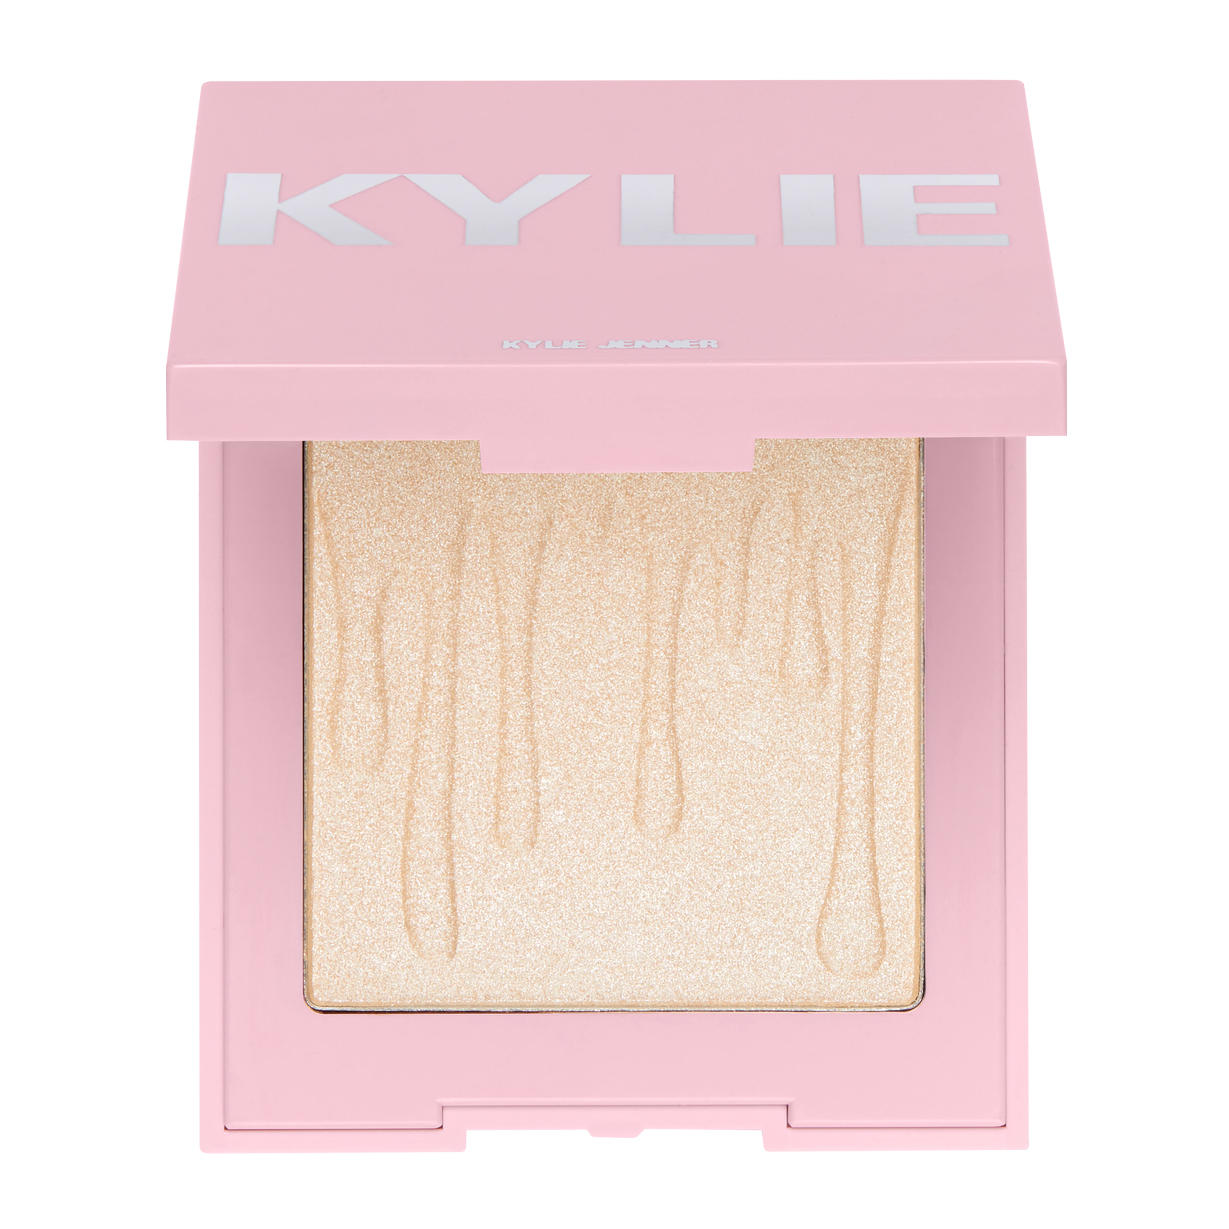 Kylie Kylighter Pressed Illuminating Powder Ice Me Out